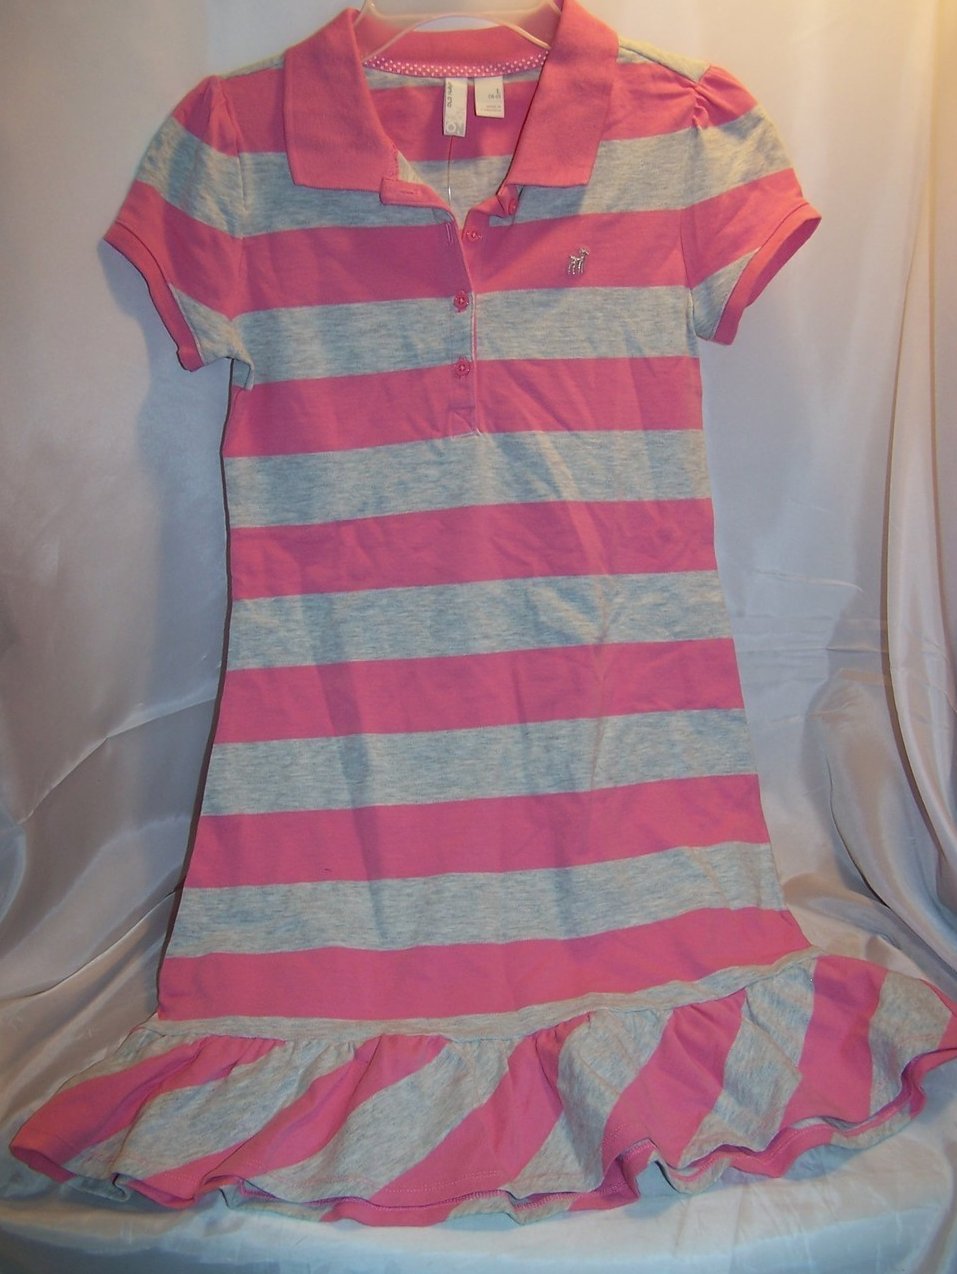 New Sz L 10, 12 Old Navy Pink and Gray Striped Dress